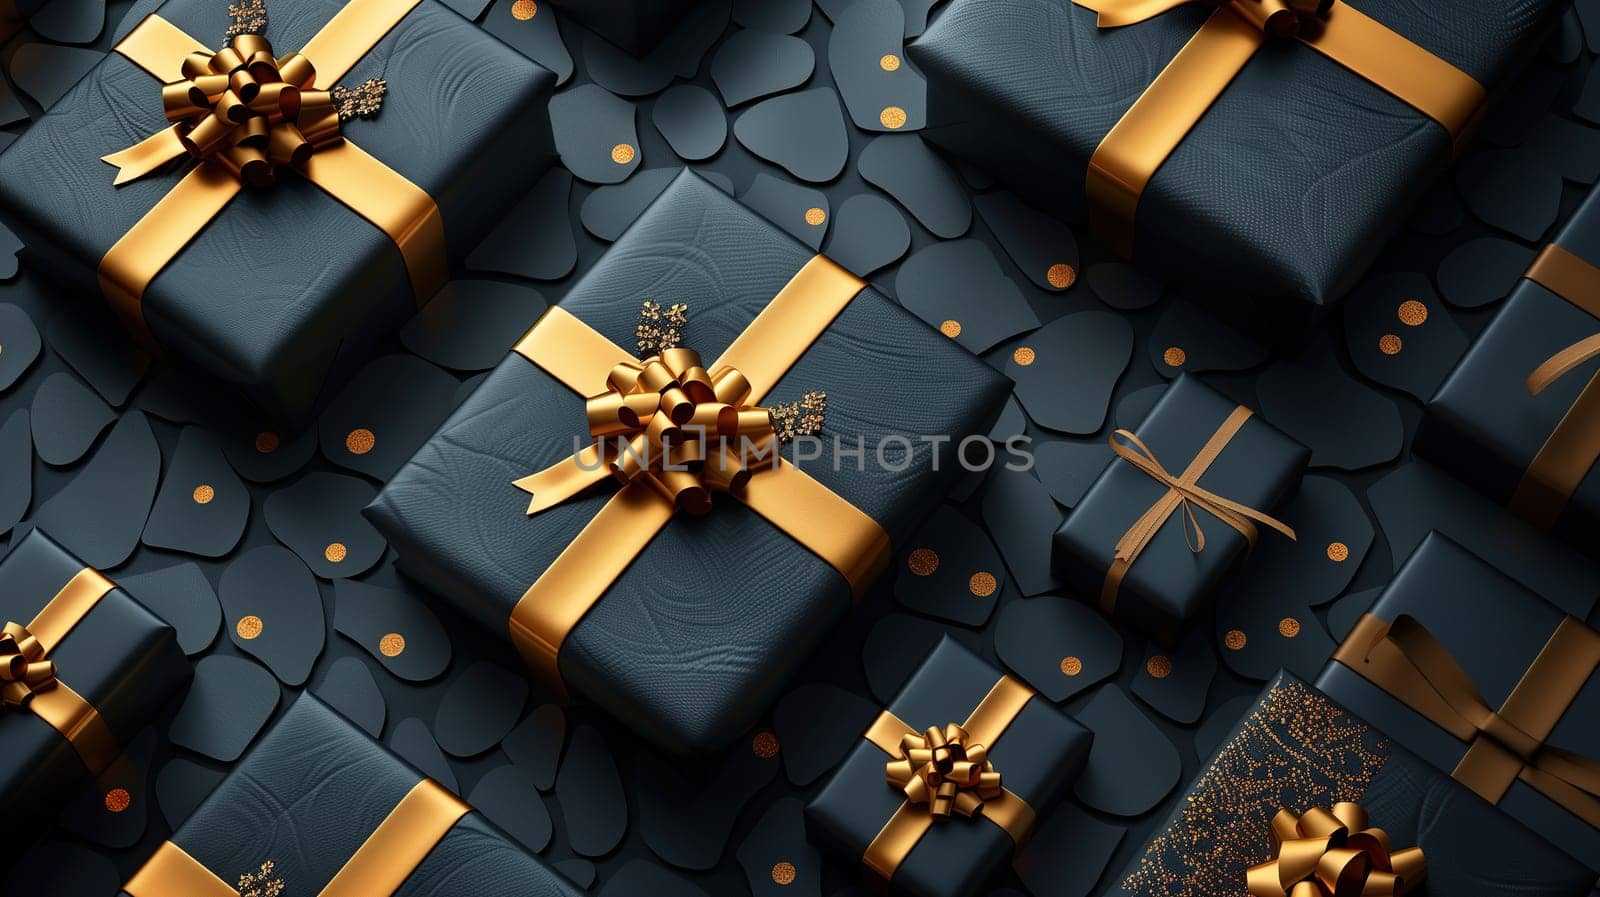 A collection of various presents wrapped in colorful paper and ribbons are neatly placed on a table. The gifts are of different sizes and shapes, ready for a special occasion or celebration.